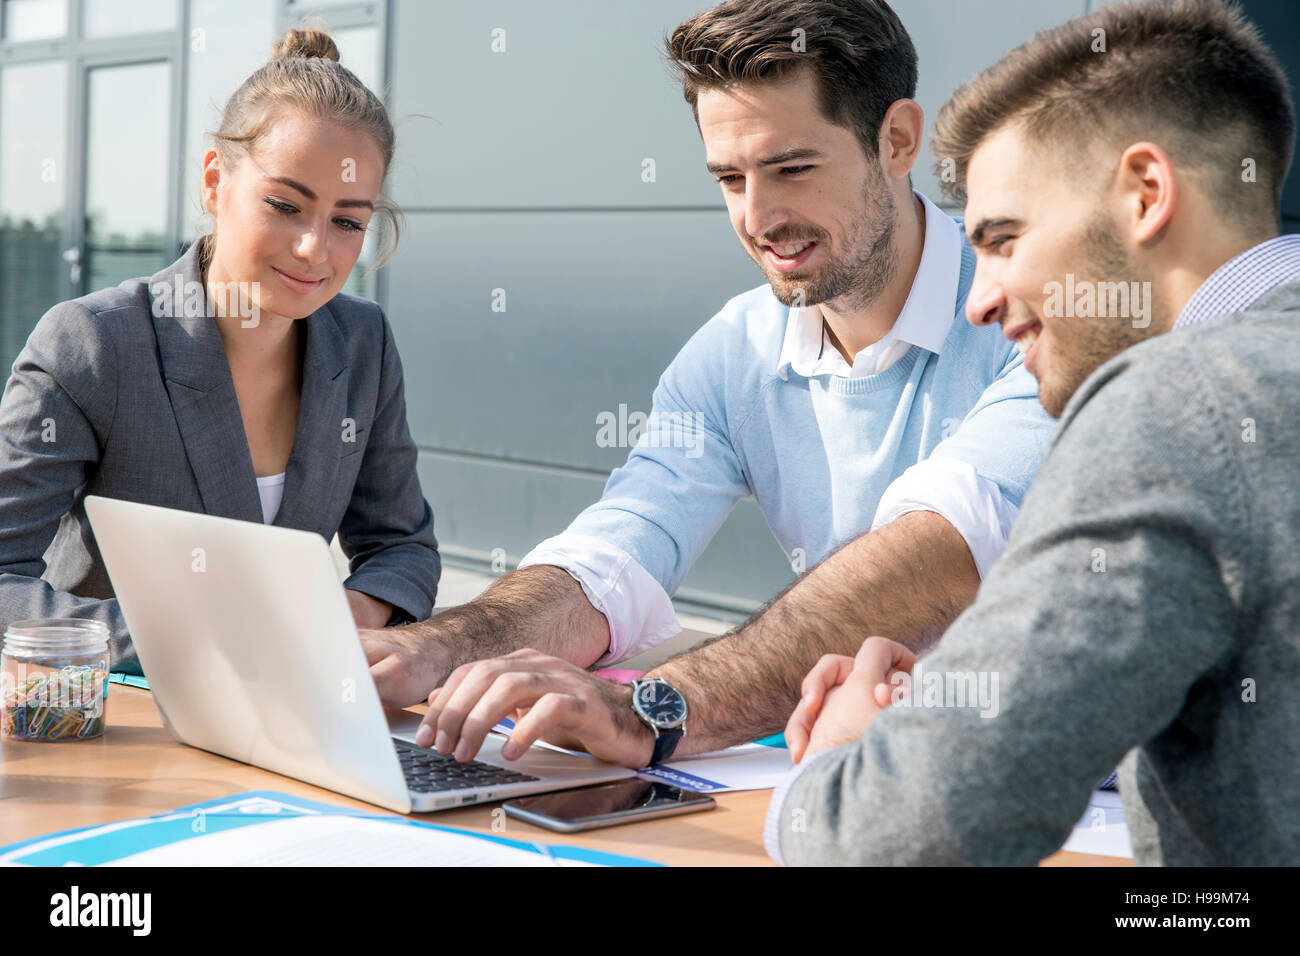 Business people working on laptop together Stock Photo